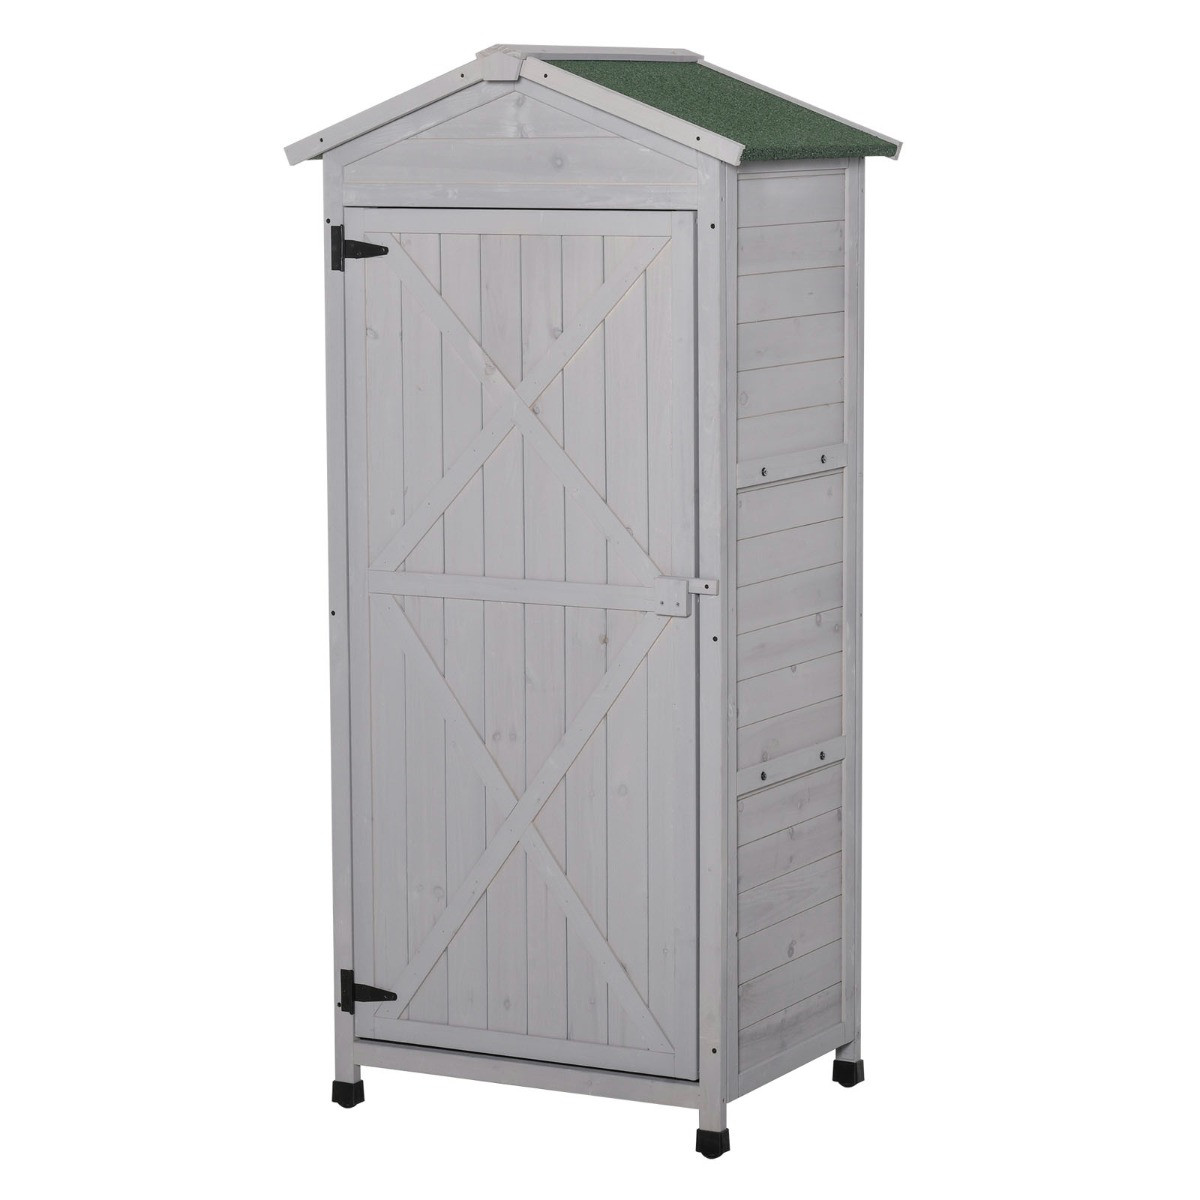 Outsunny Wooden Garden Storage Shed Cabinet, Grey - Tall>